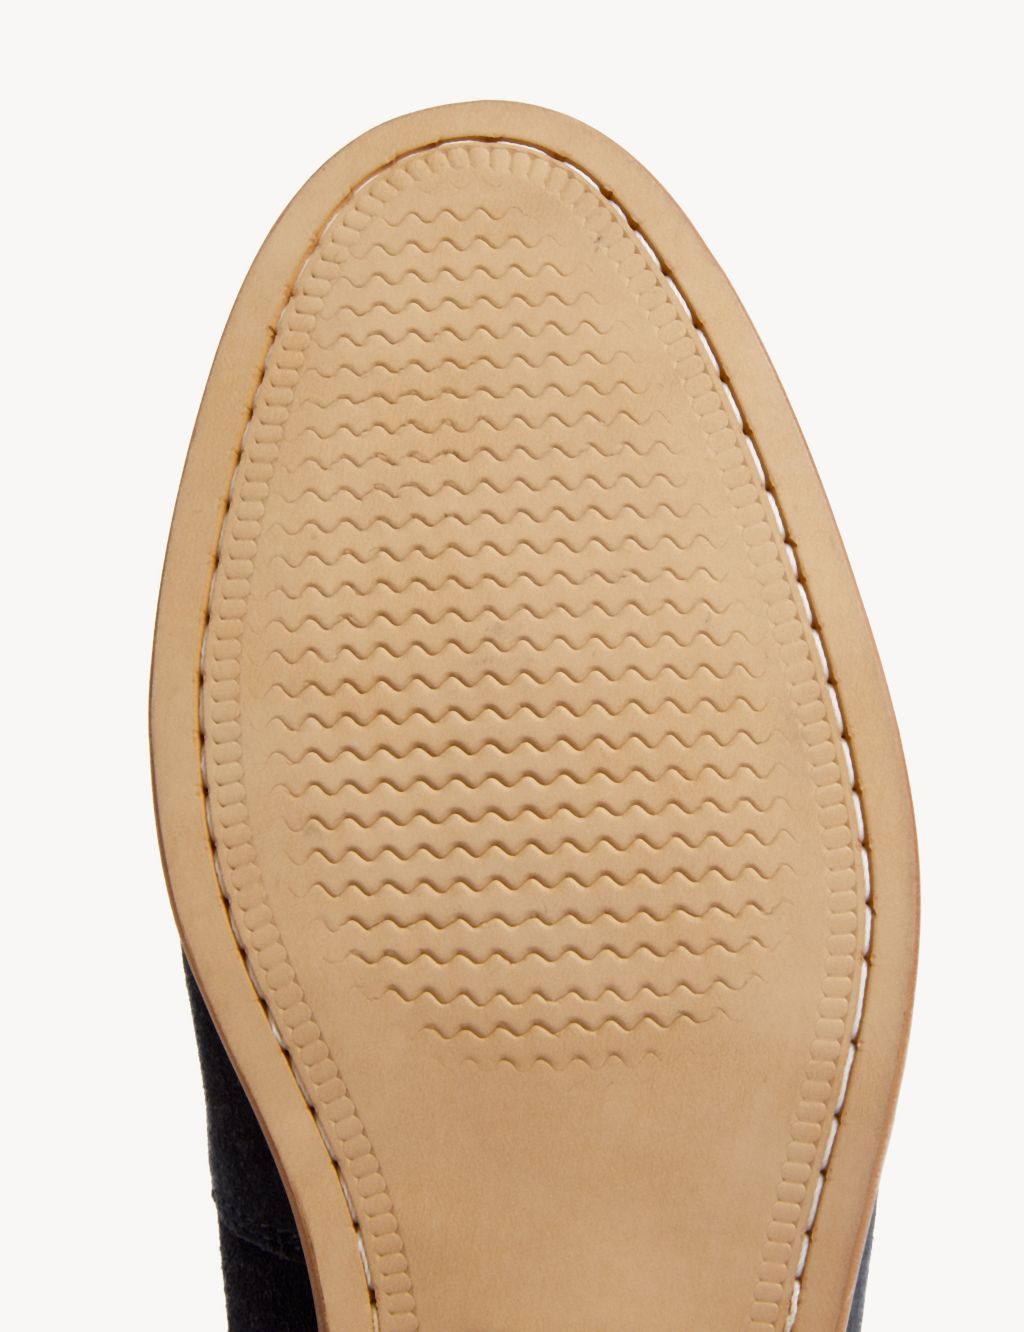 Suede Stain Resistant Slip-On Loafers image 3